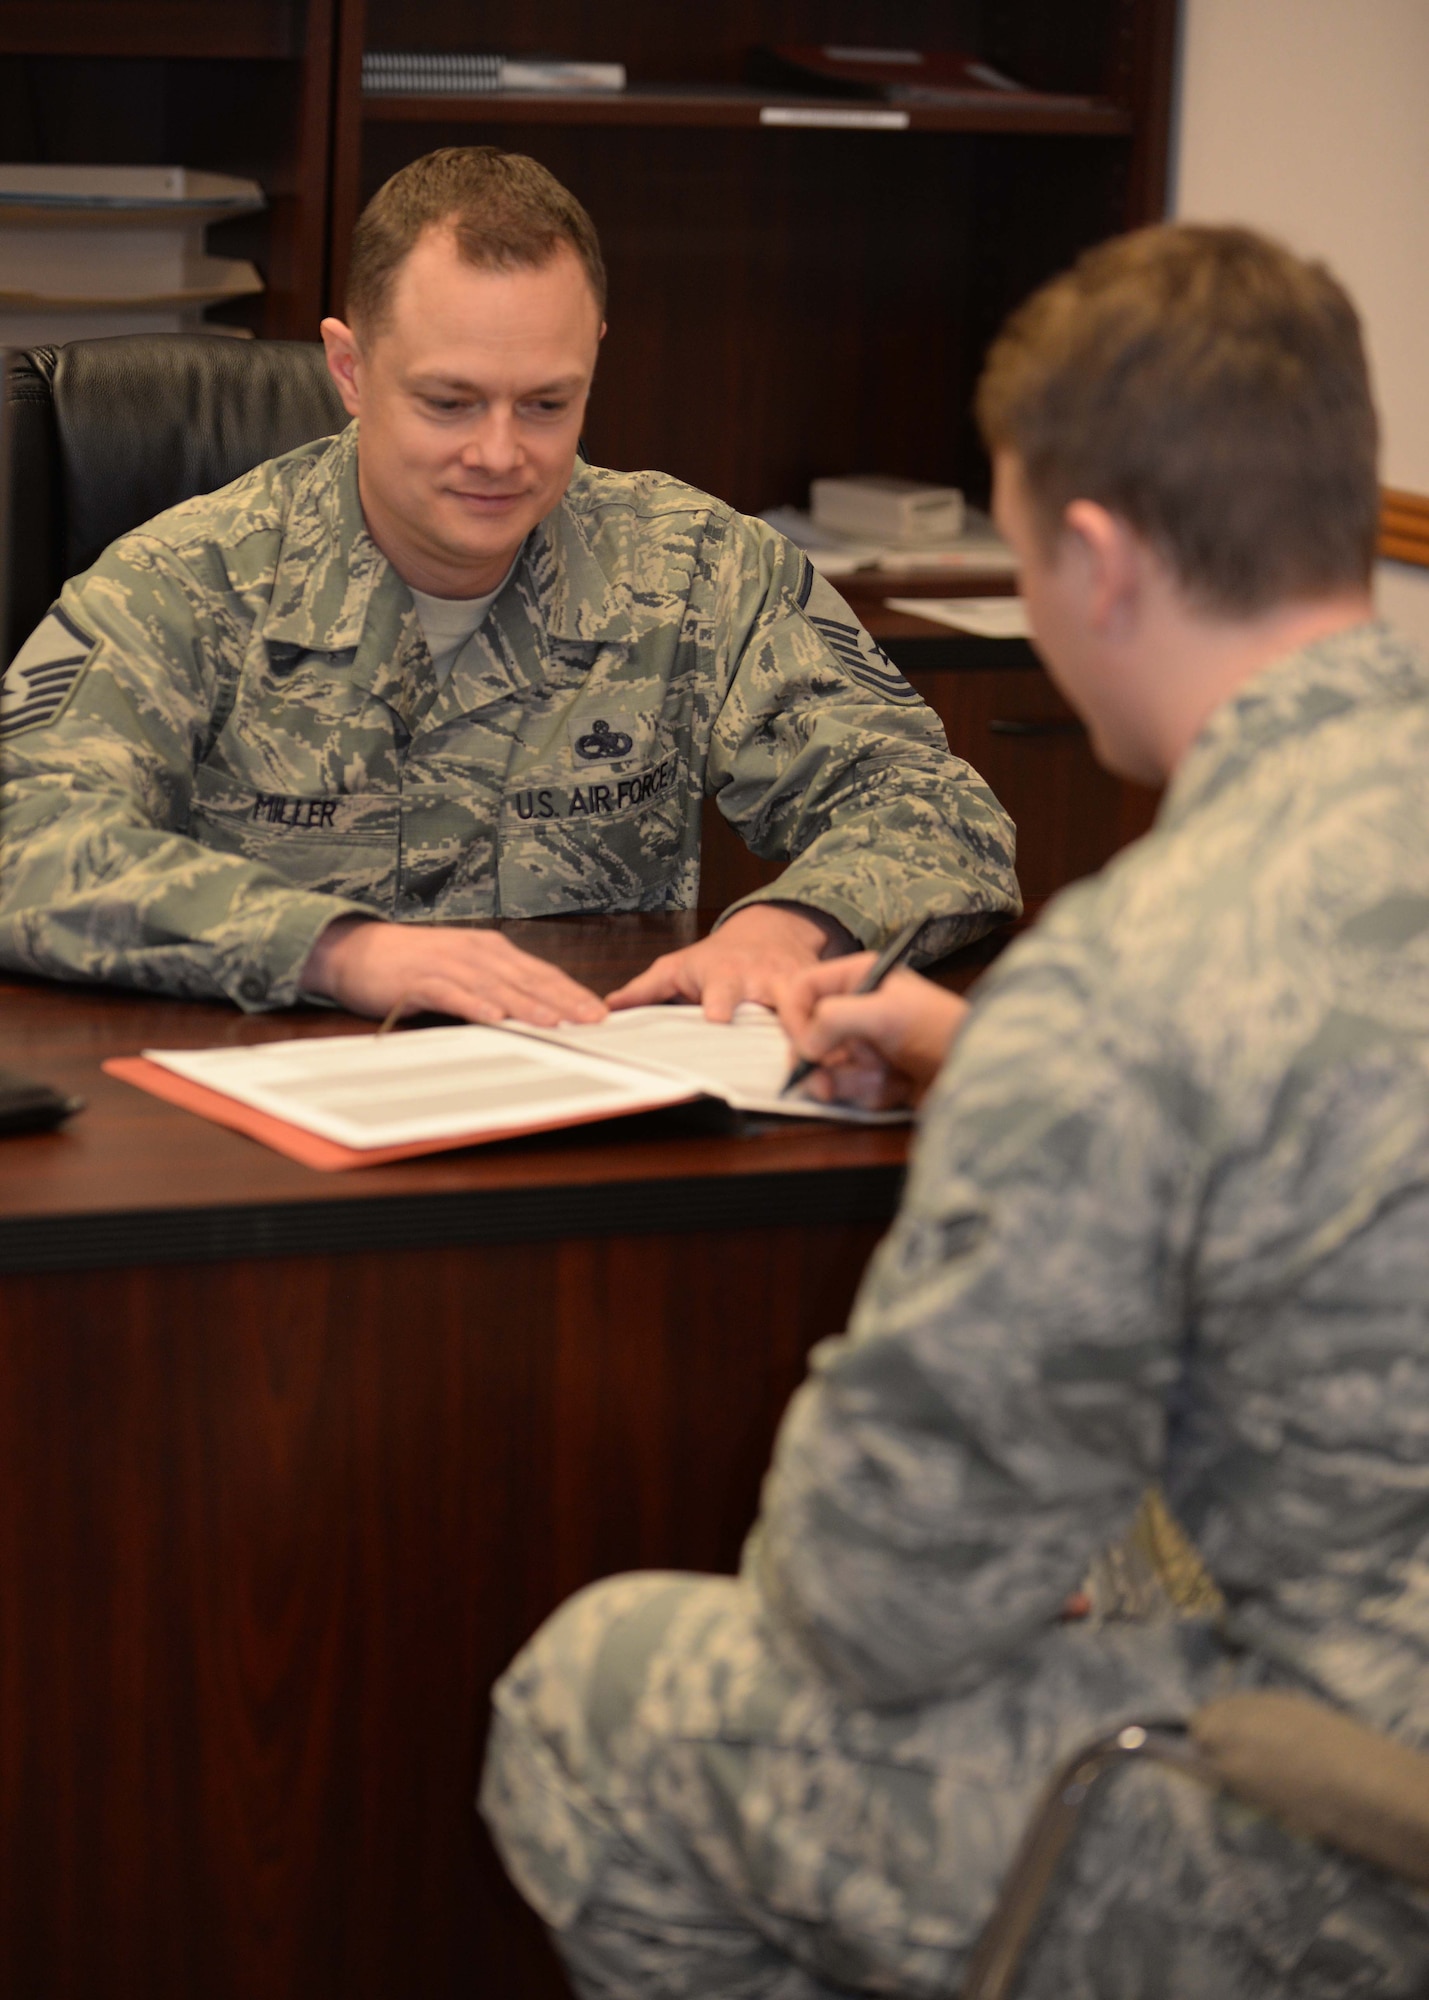 Airman 1st Class Matthew Gallagher, 28th MXS avionics test station technician, reviews his mobility folder with Master Sgt. Matthew Miller, 28th Maintenance Squadron unit deployment manager, at Ellsworth Air Force Base, S.D., March 4, 2015. UDMs ensure squadron personnel have necessary deployment items and inform leadership of the unit’s deployment status. (U.S. Air Force photo by Airman 1st Class Rebecca Imwalle/Released)